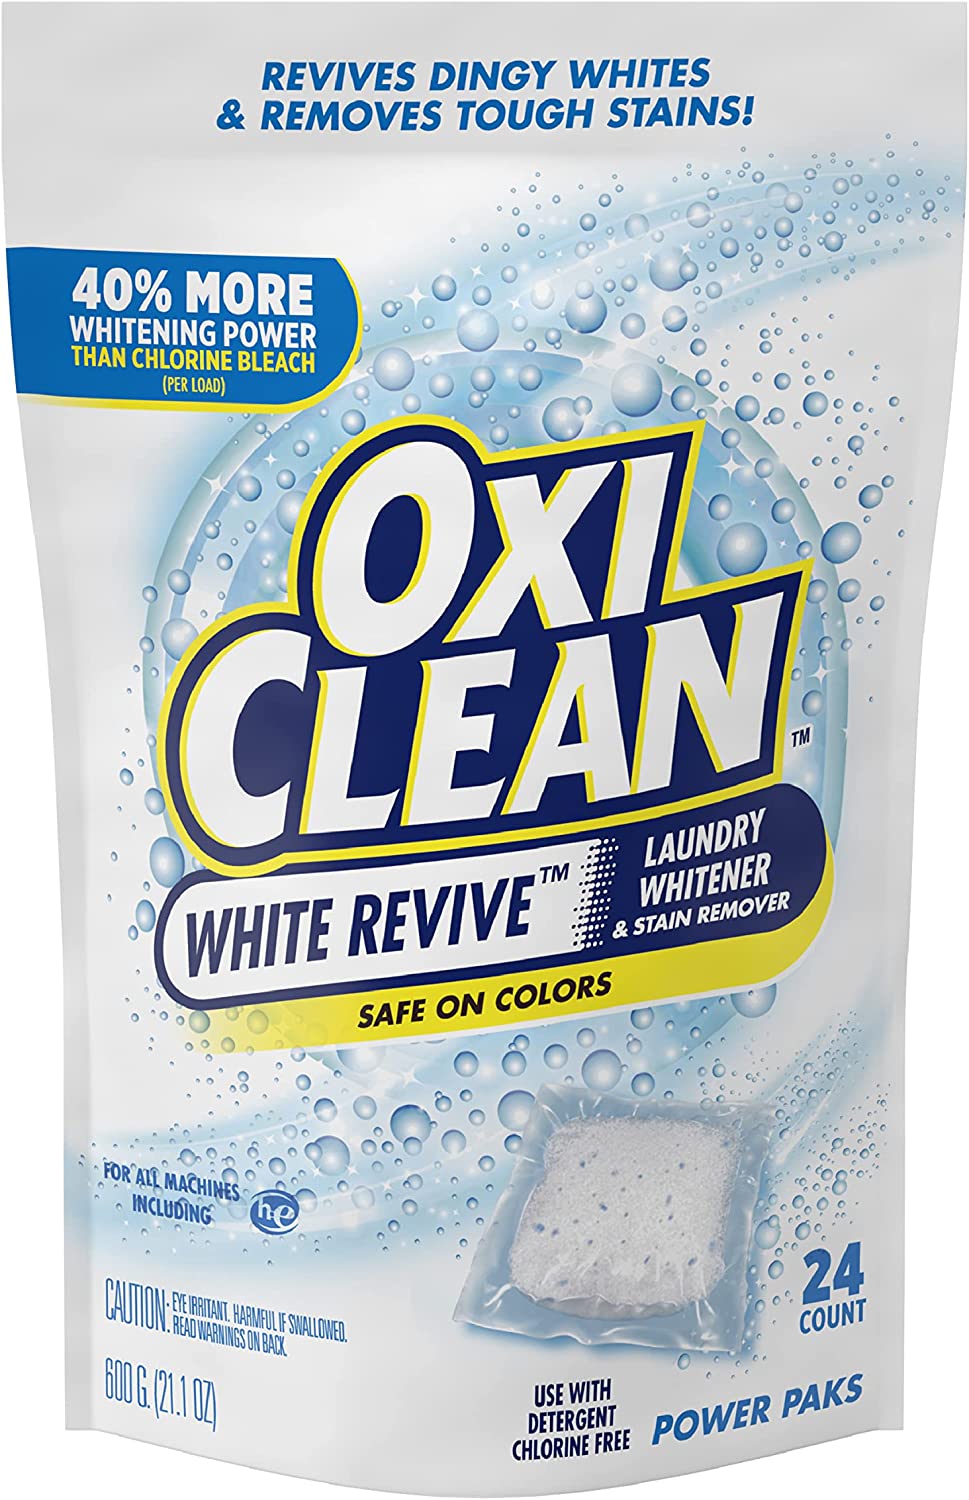 OxiClean White Revive Laundry Whitener & Stain Remover [...]